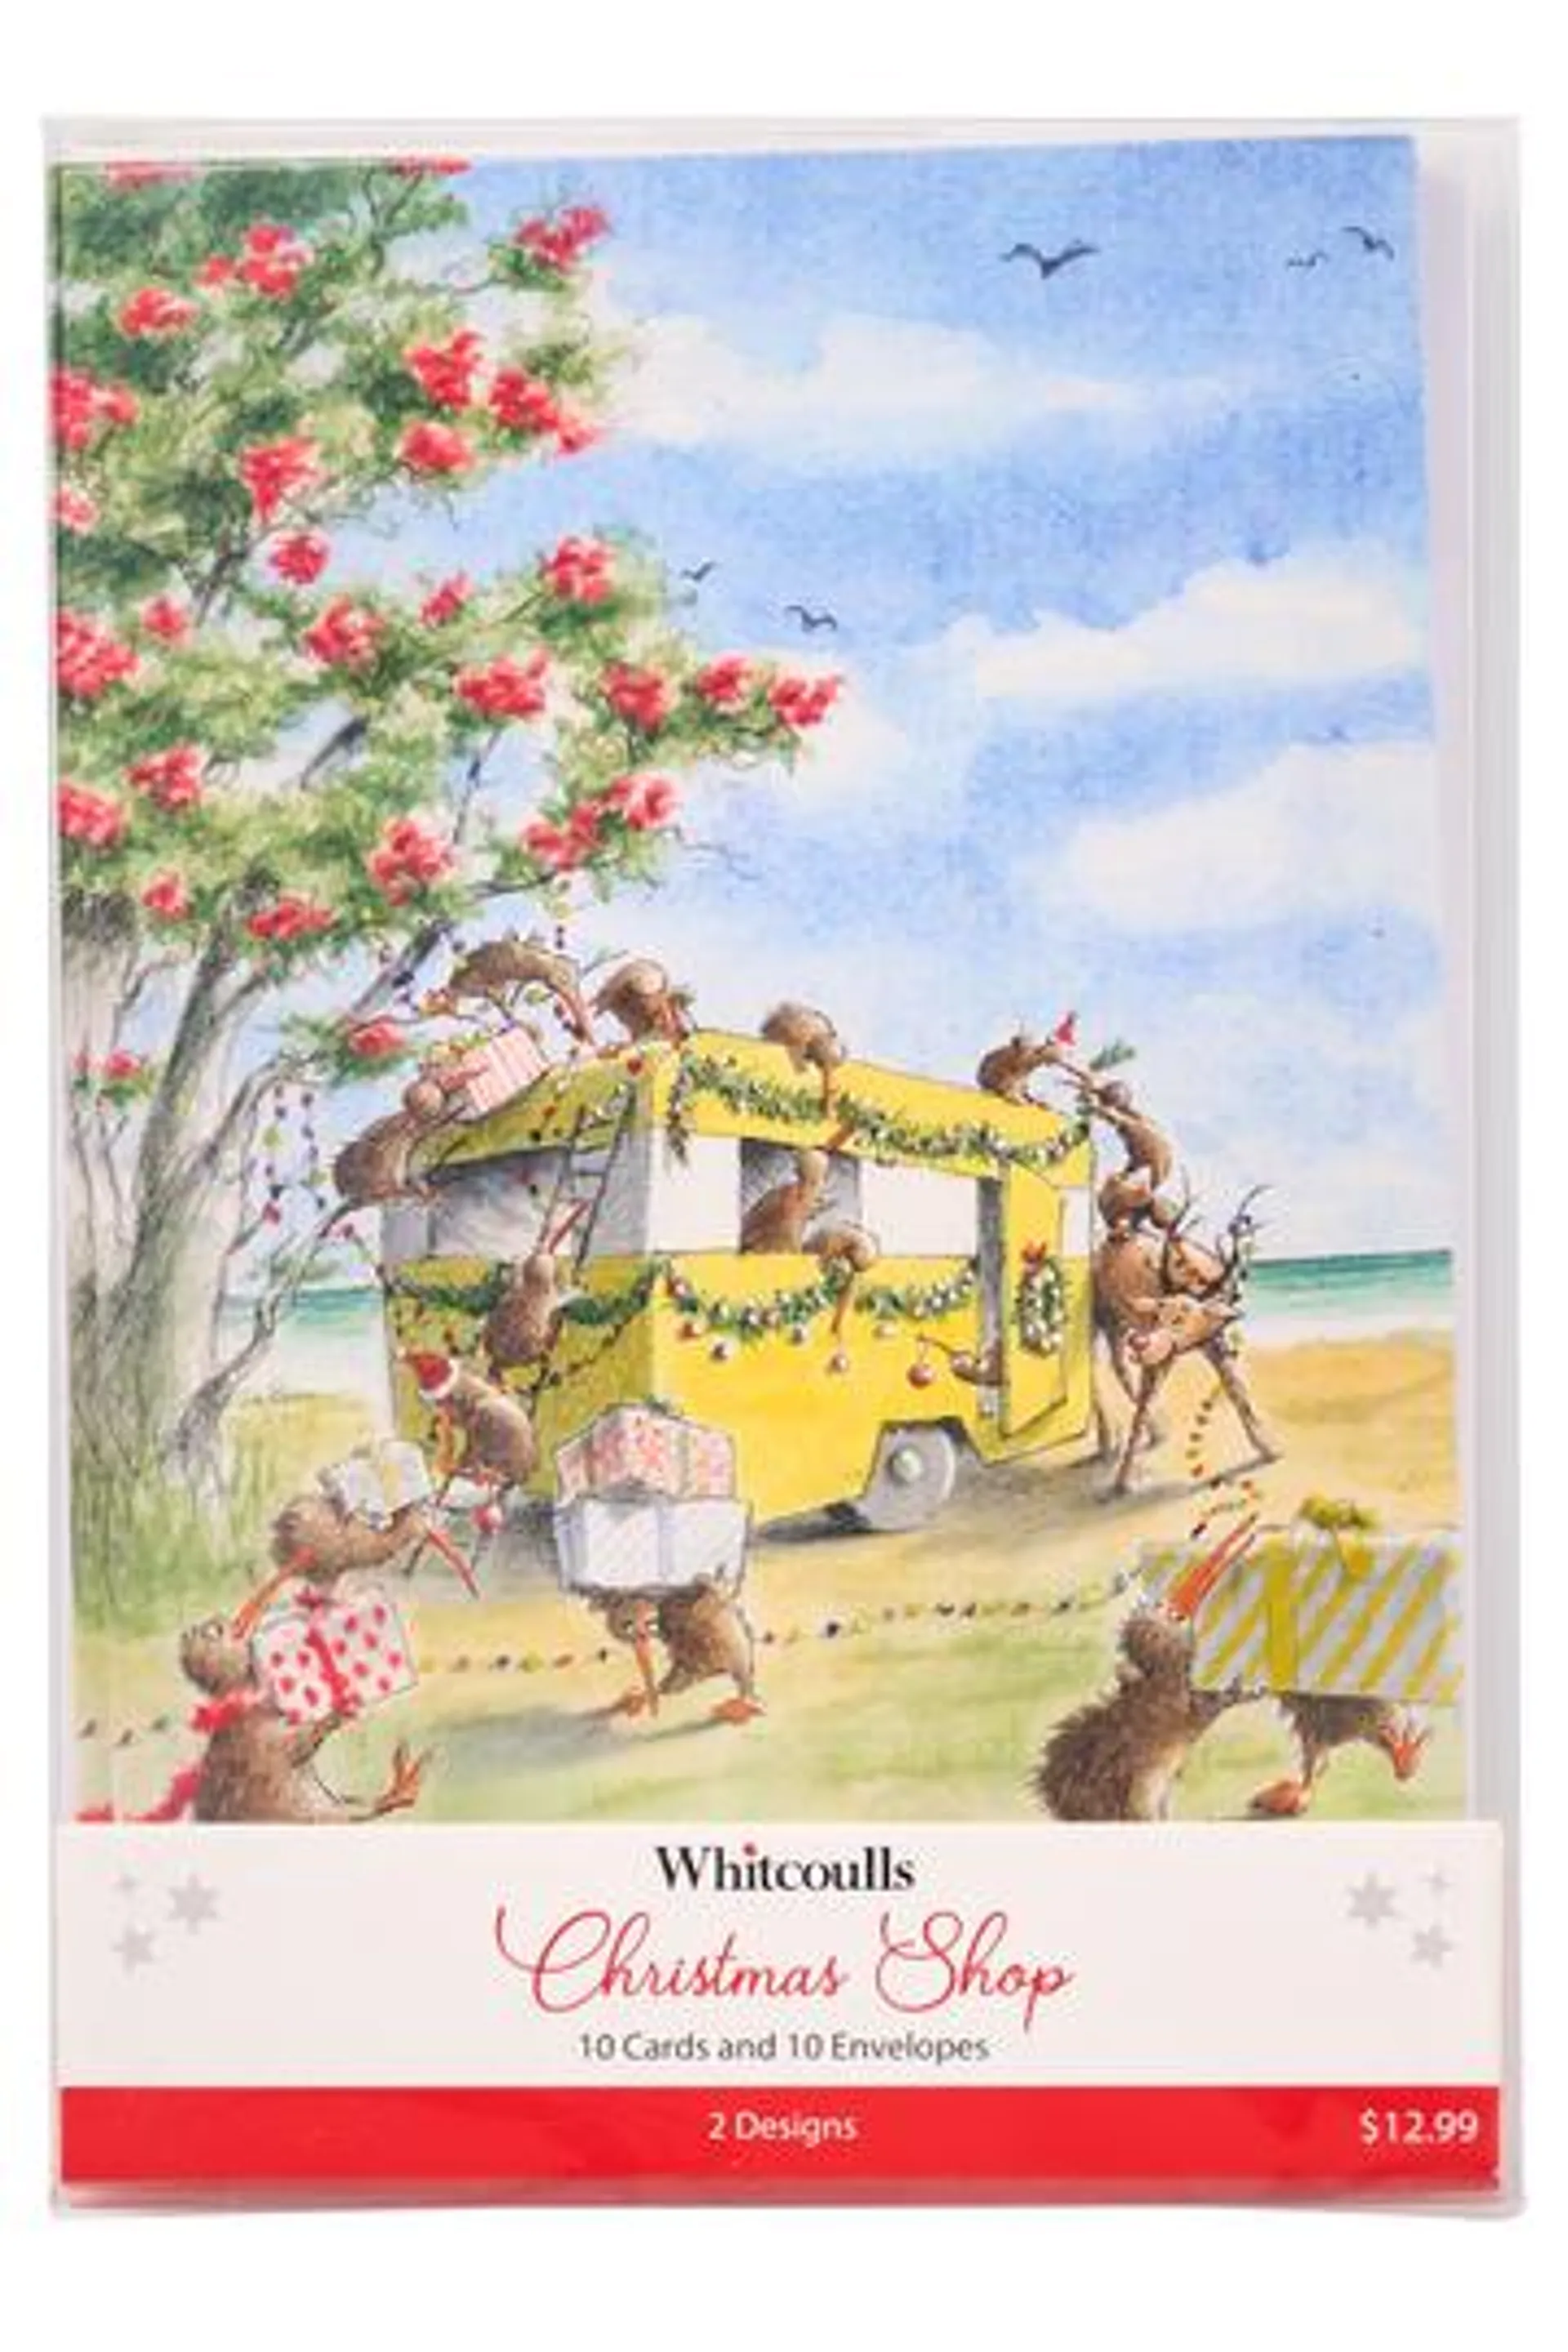 Whitcoulls Christmas Shop Boxed Cards Kiwi Caravan Pack of 10